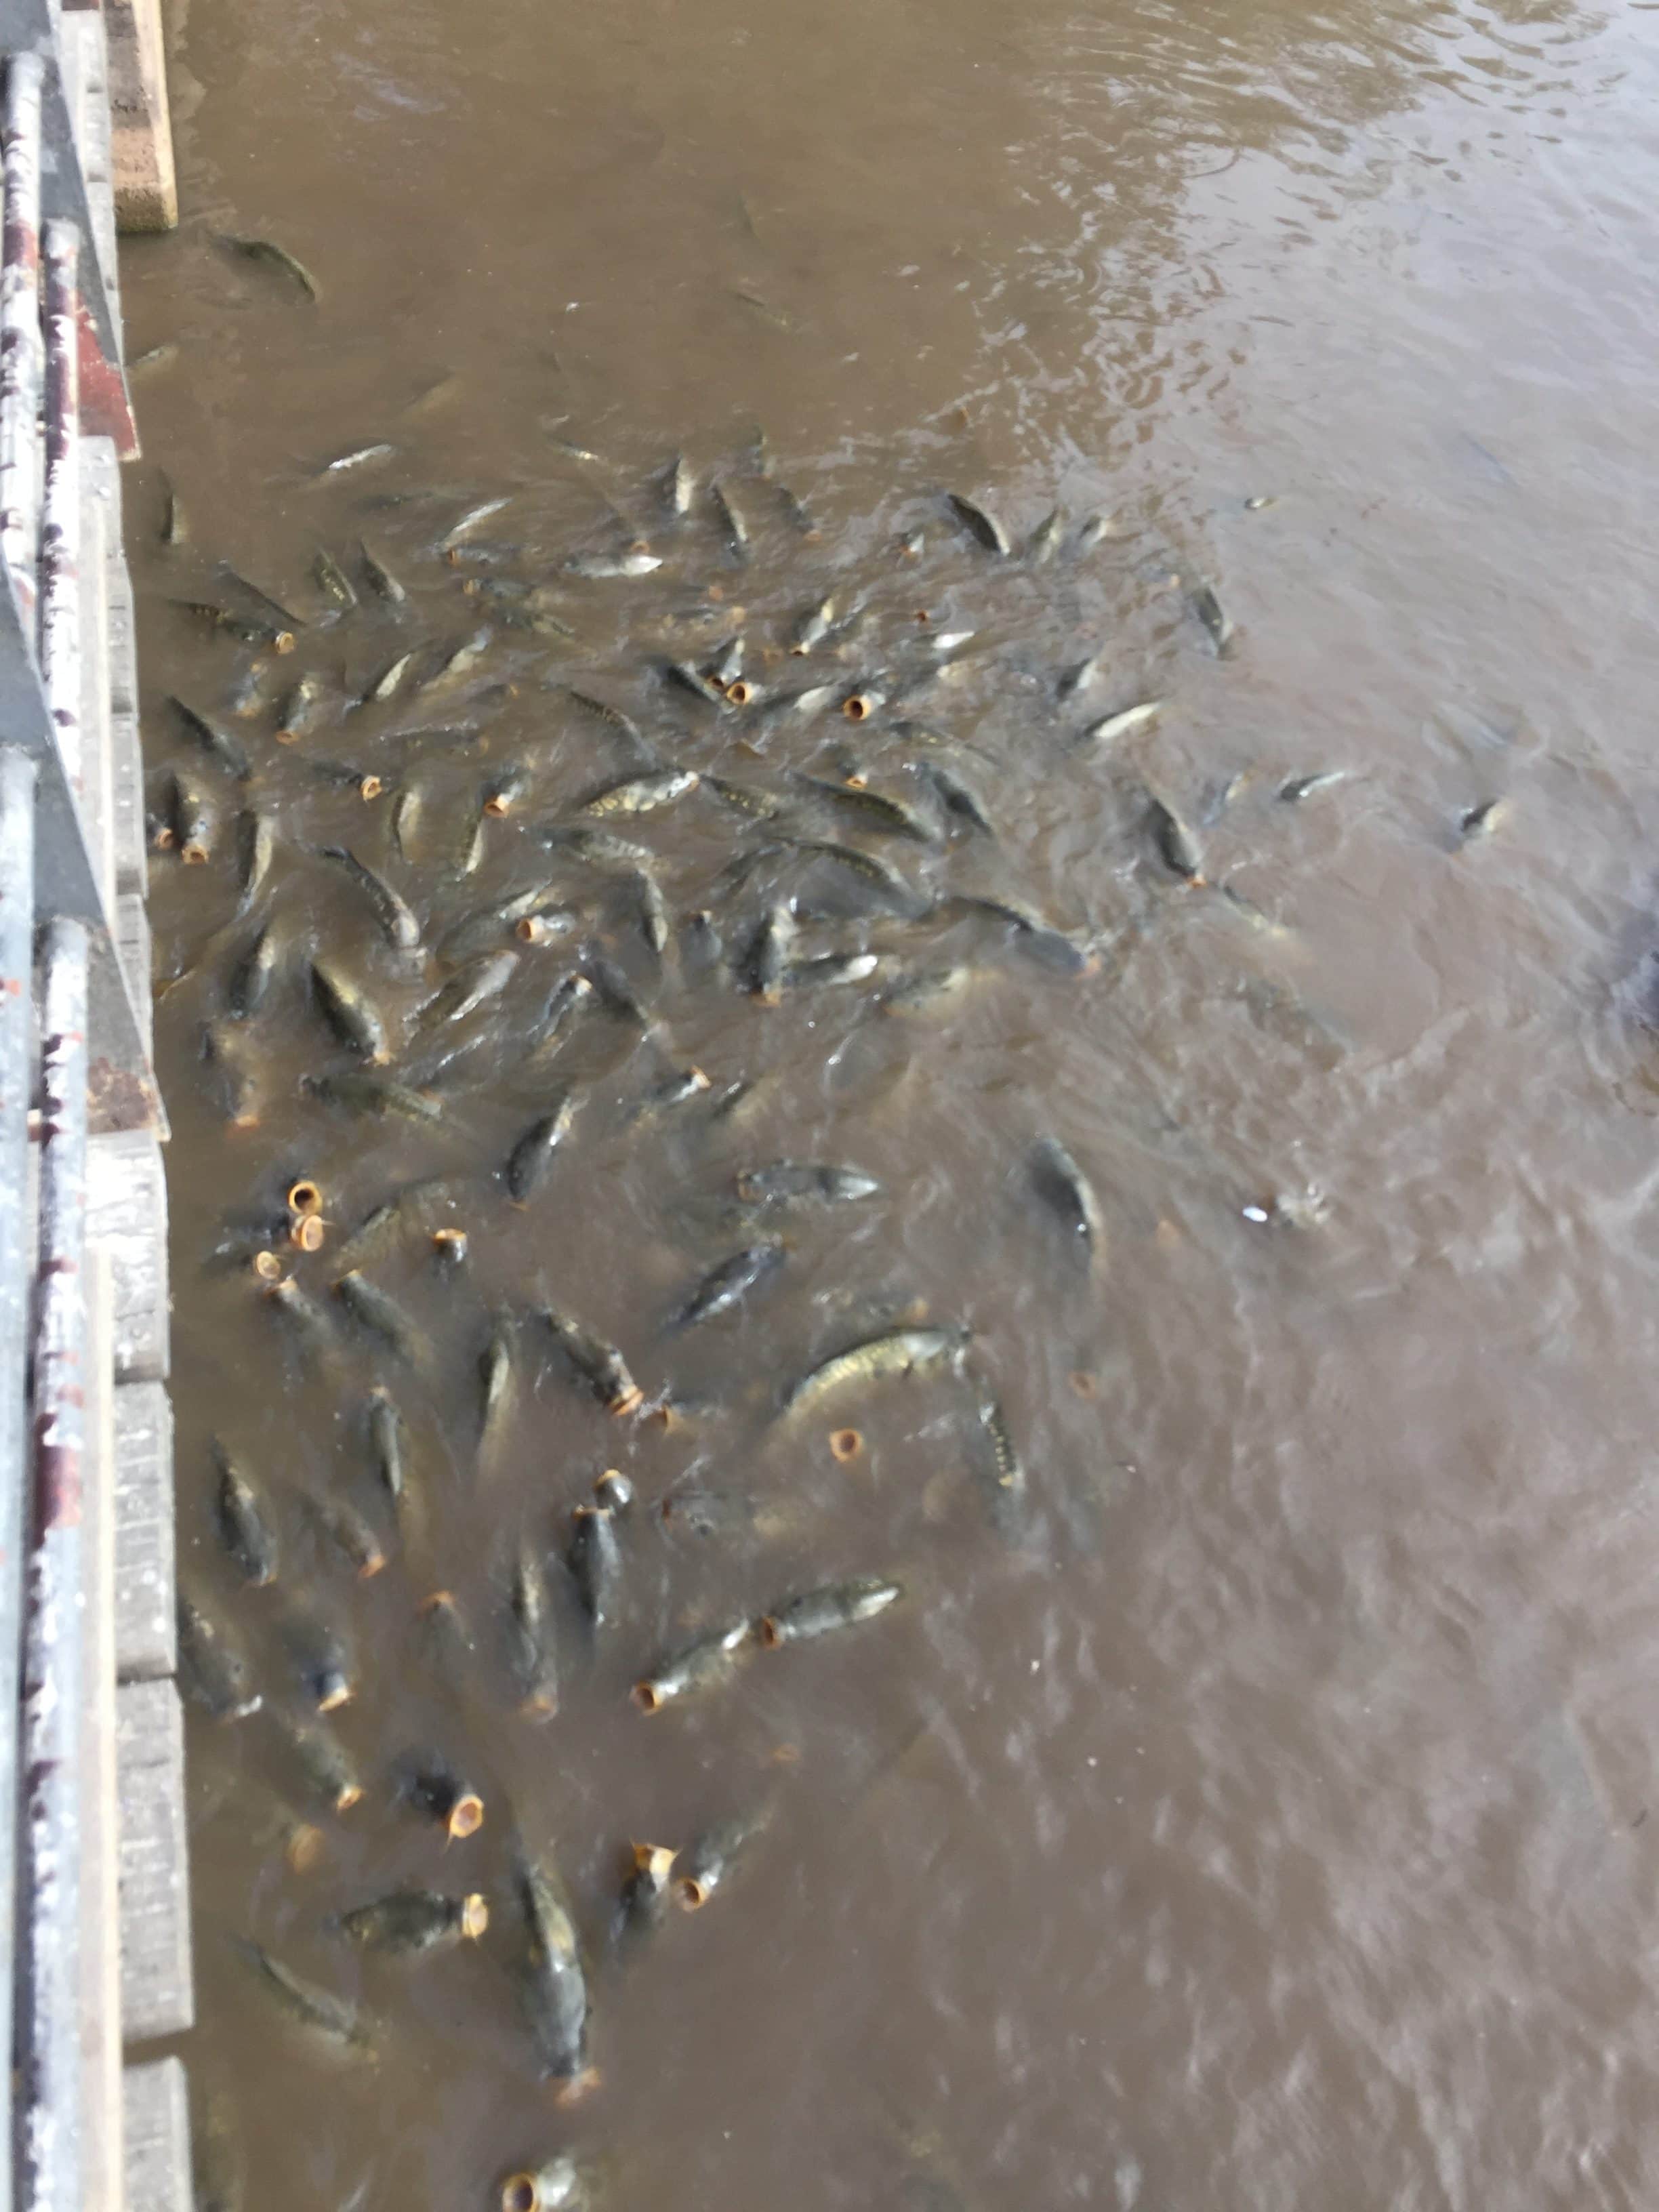 Crossing the bridge on the lake and some hungry fish